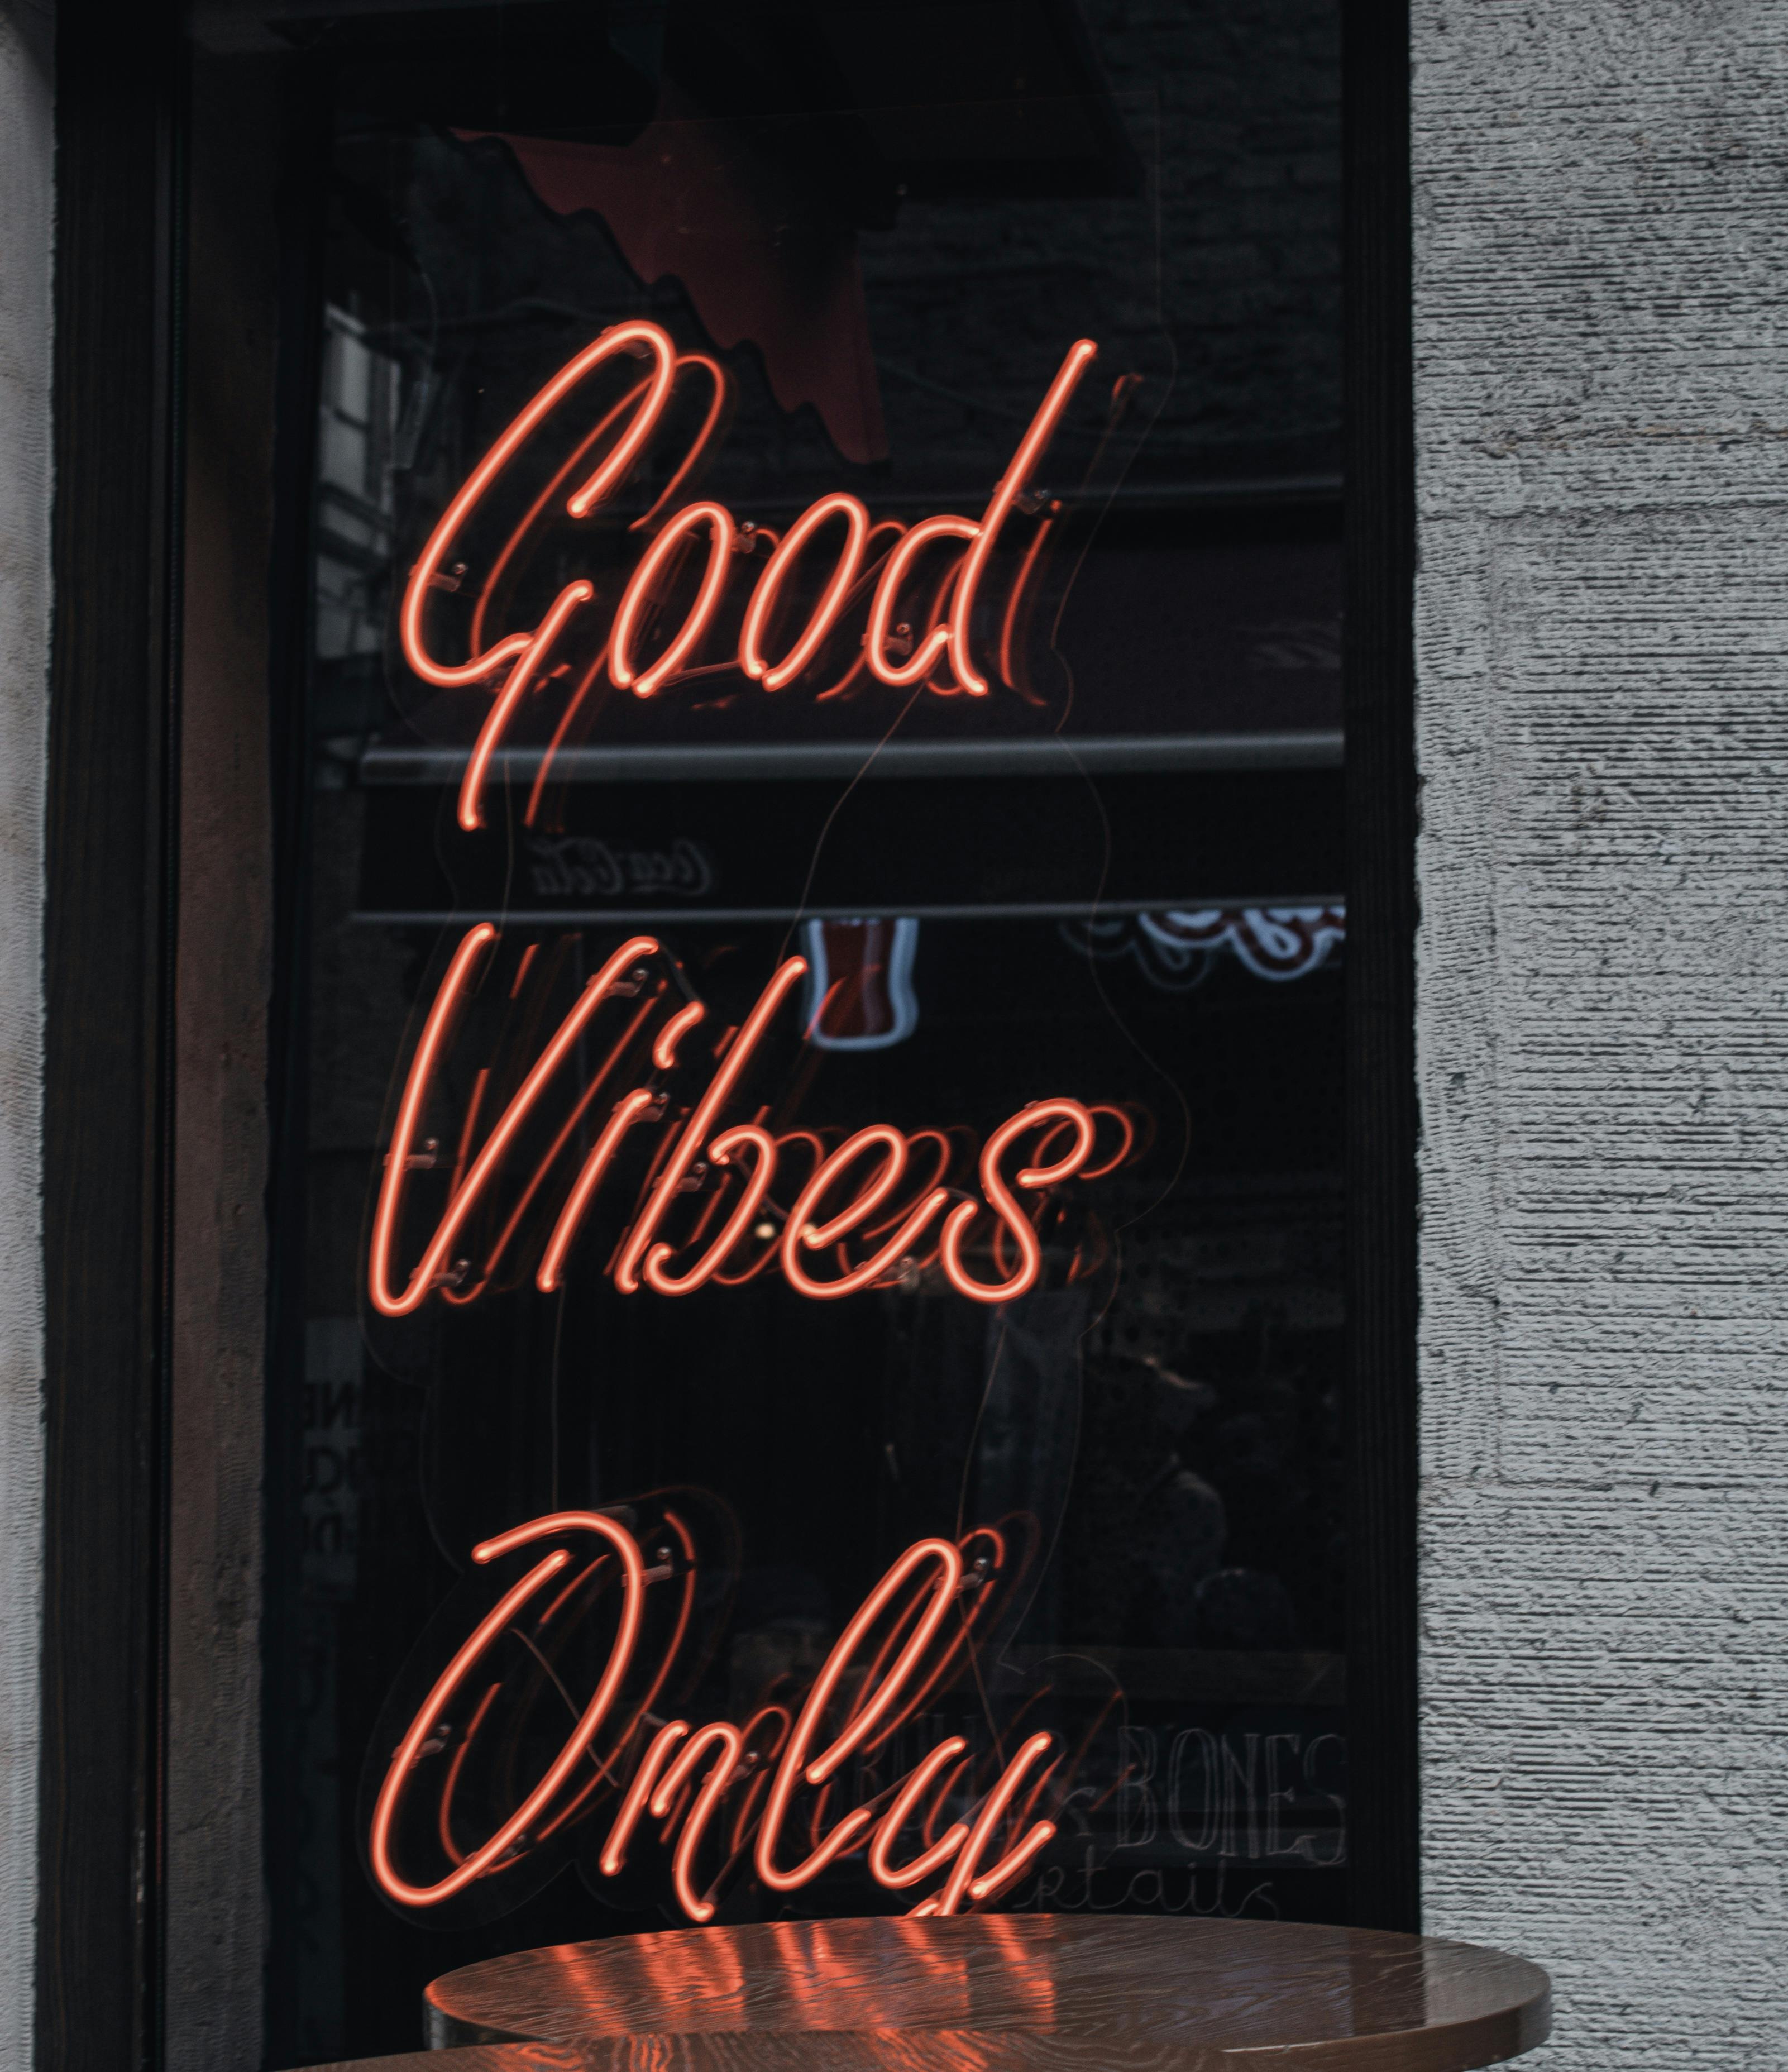 5757 Good Vibes Only Images Stock Photos  Vectors  Shutterstock